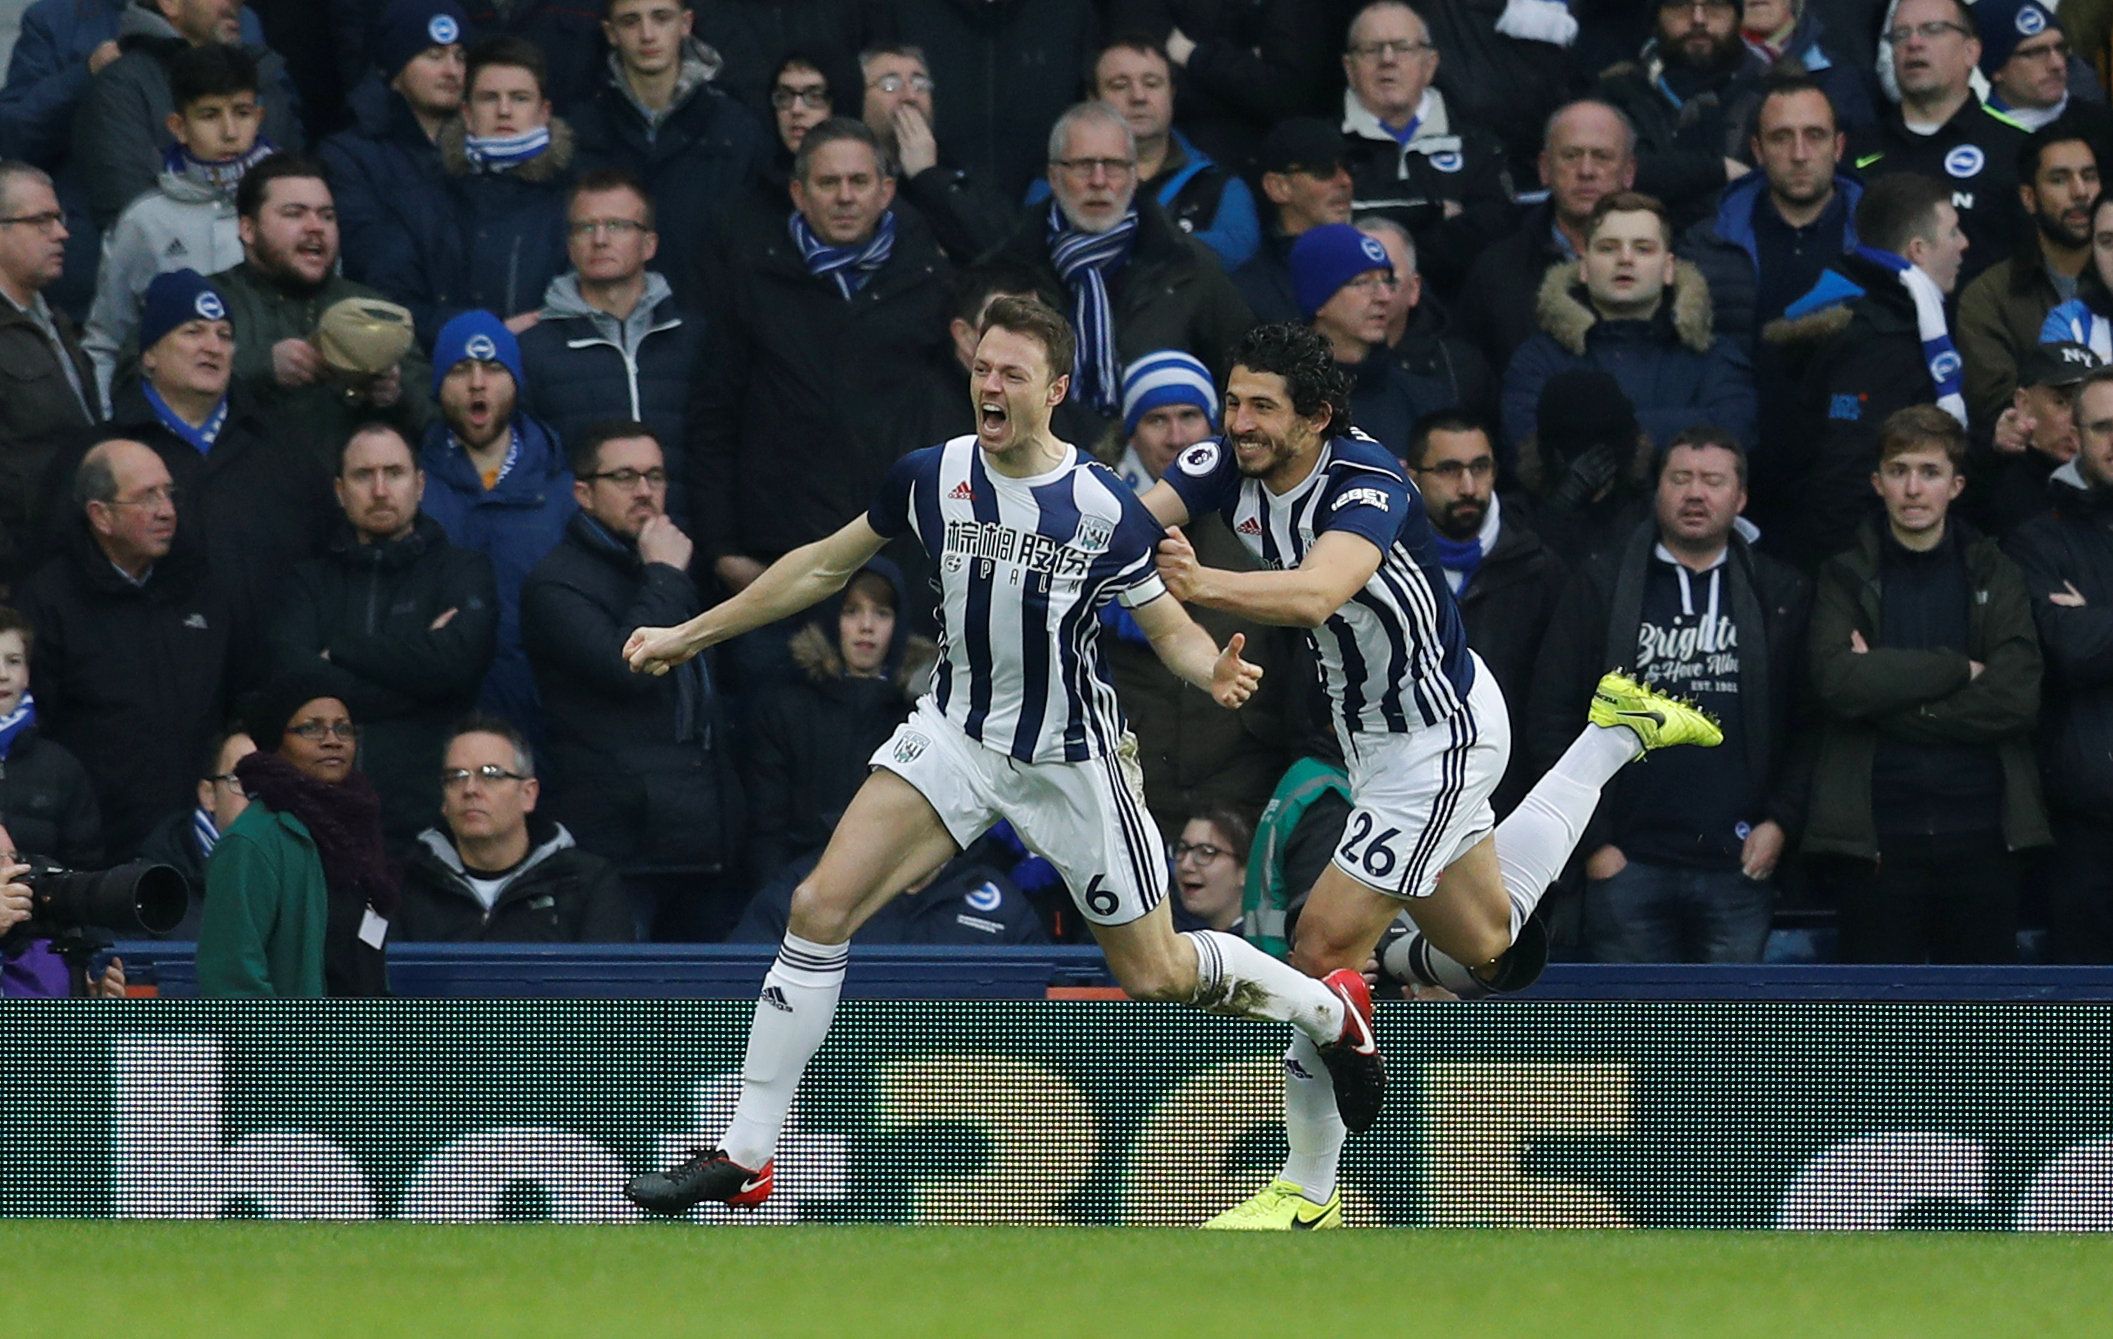 Soccer Football - Premier League - West Bromwich Albion vs Brighton &amp; Hove Albion - The Hawthorns, West Bromwich, Britain - January 13, 2018   West Bromwich Albion's Jonny Evans celebrates scoring their first goal with Ahmed Hegazi    REUTERS/Darren Staples    EDITORIAL USE ONLY. No use with unauthorized audio, video, data, fixture lists, club/league logos or "live" services. Online in-match use limited to 75 images, no video emulation. No use in betting, games or single club/league/player p